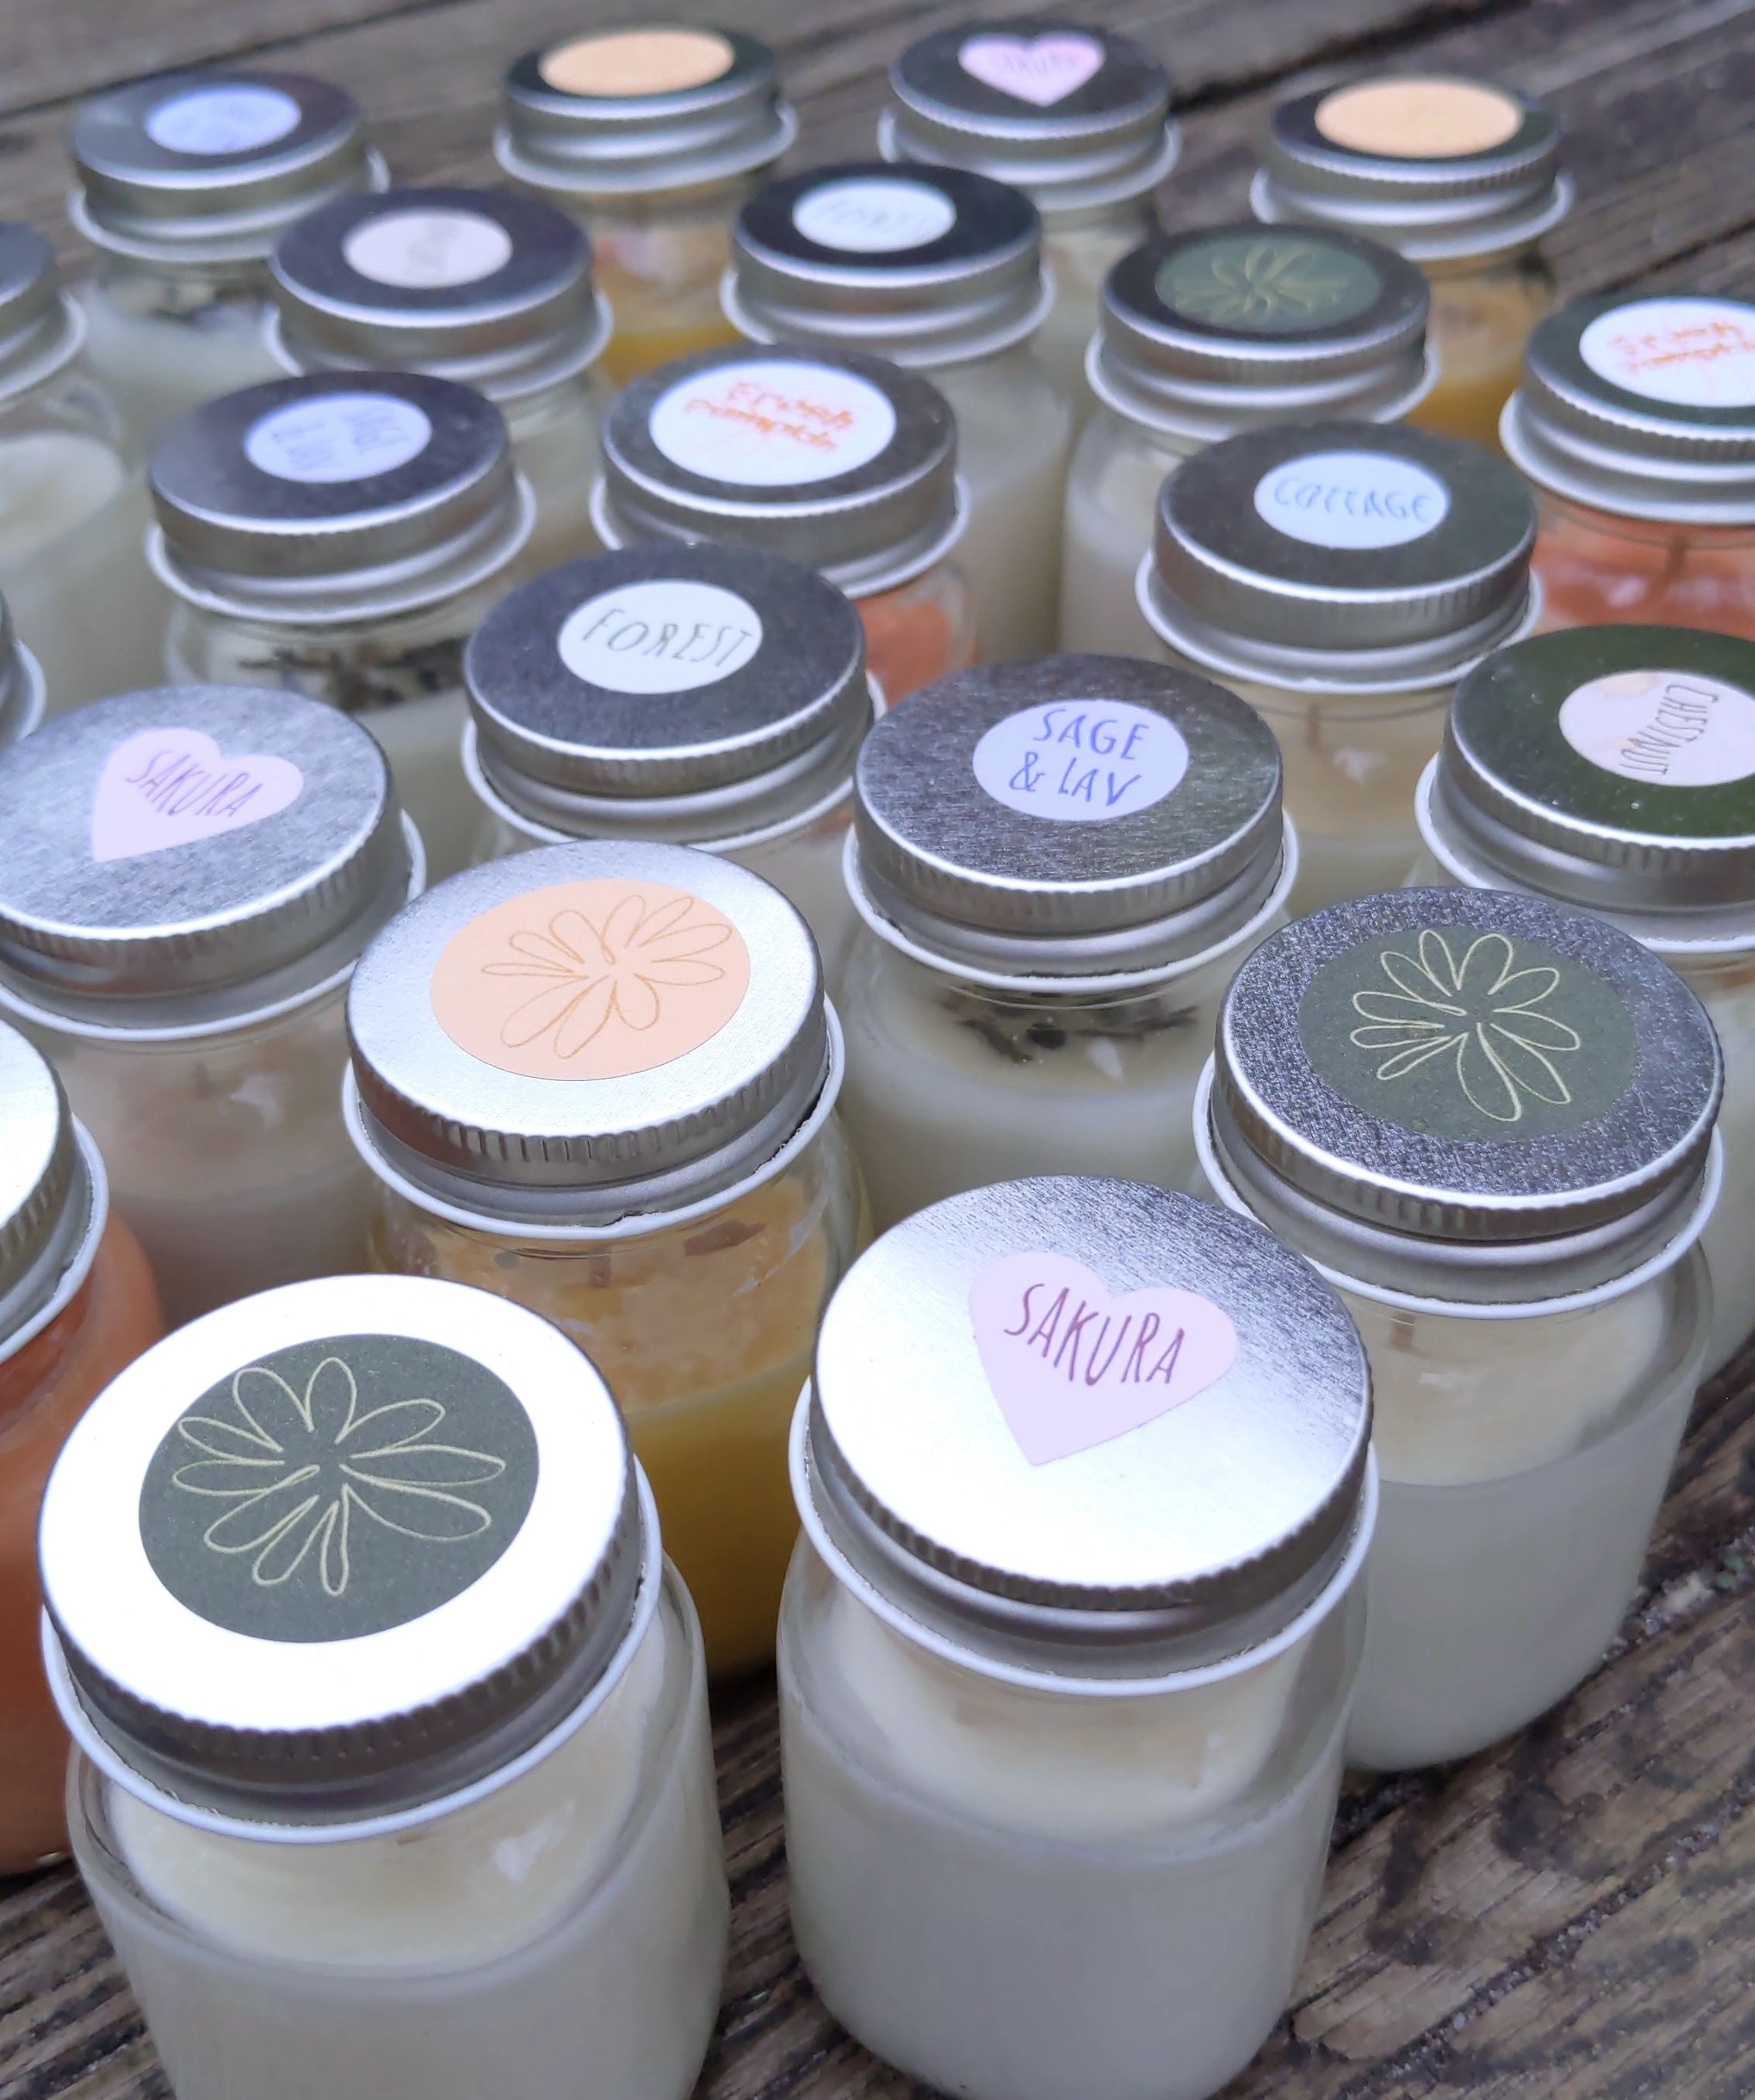 Mini Farmhouse Candles Small Mason Jar Candles Rustic Candles Gift Candles  Housewarming Gifts Country Candles Rose Candles 